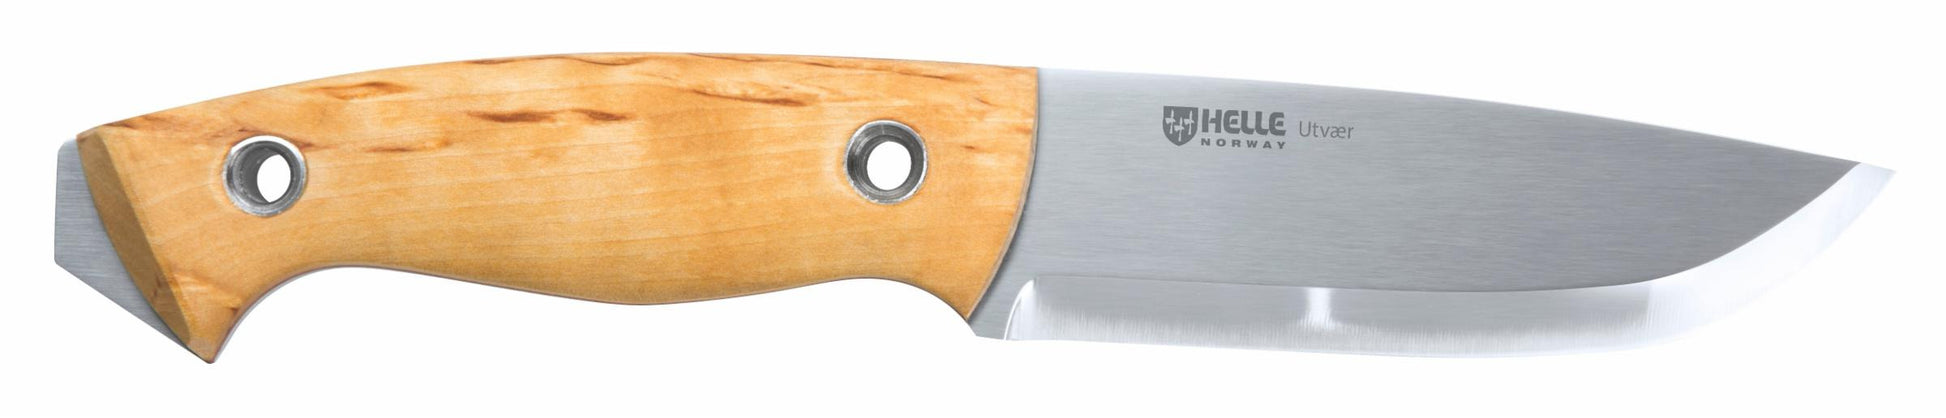 Helle Bushcraft Outdoors Work Knife Hunting Survival